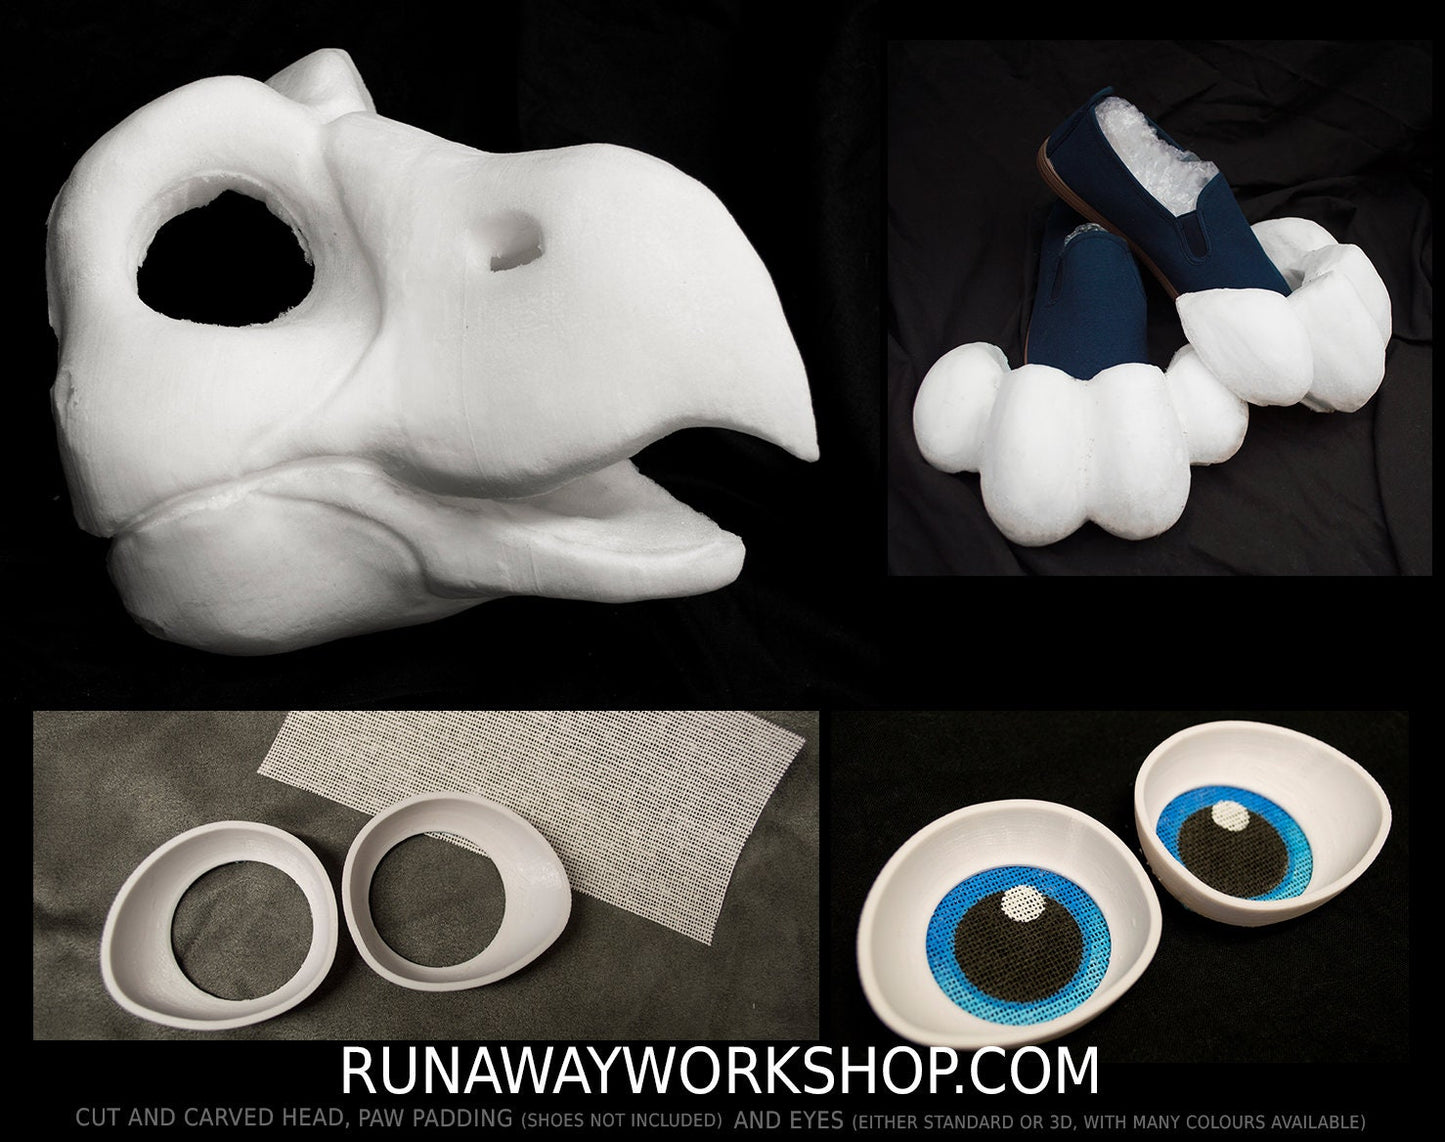 Large Gryphon bundle deal: cut and carved head base, Eyes and Feet padding, for costumes mascots and fursuits.